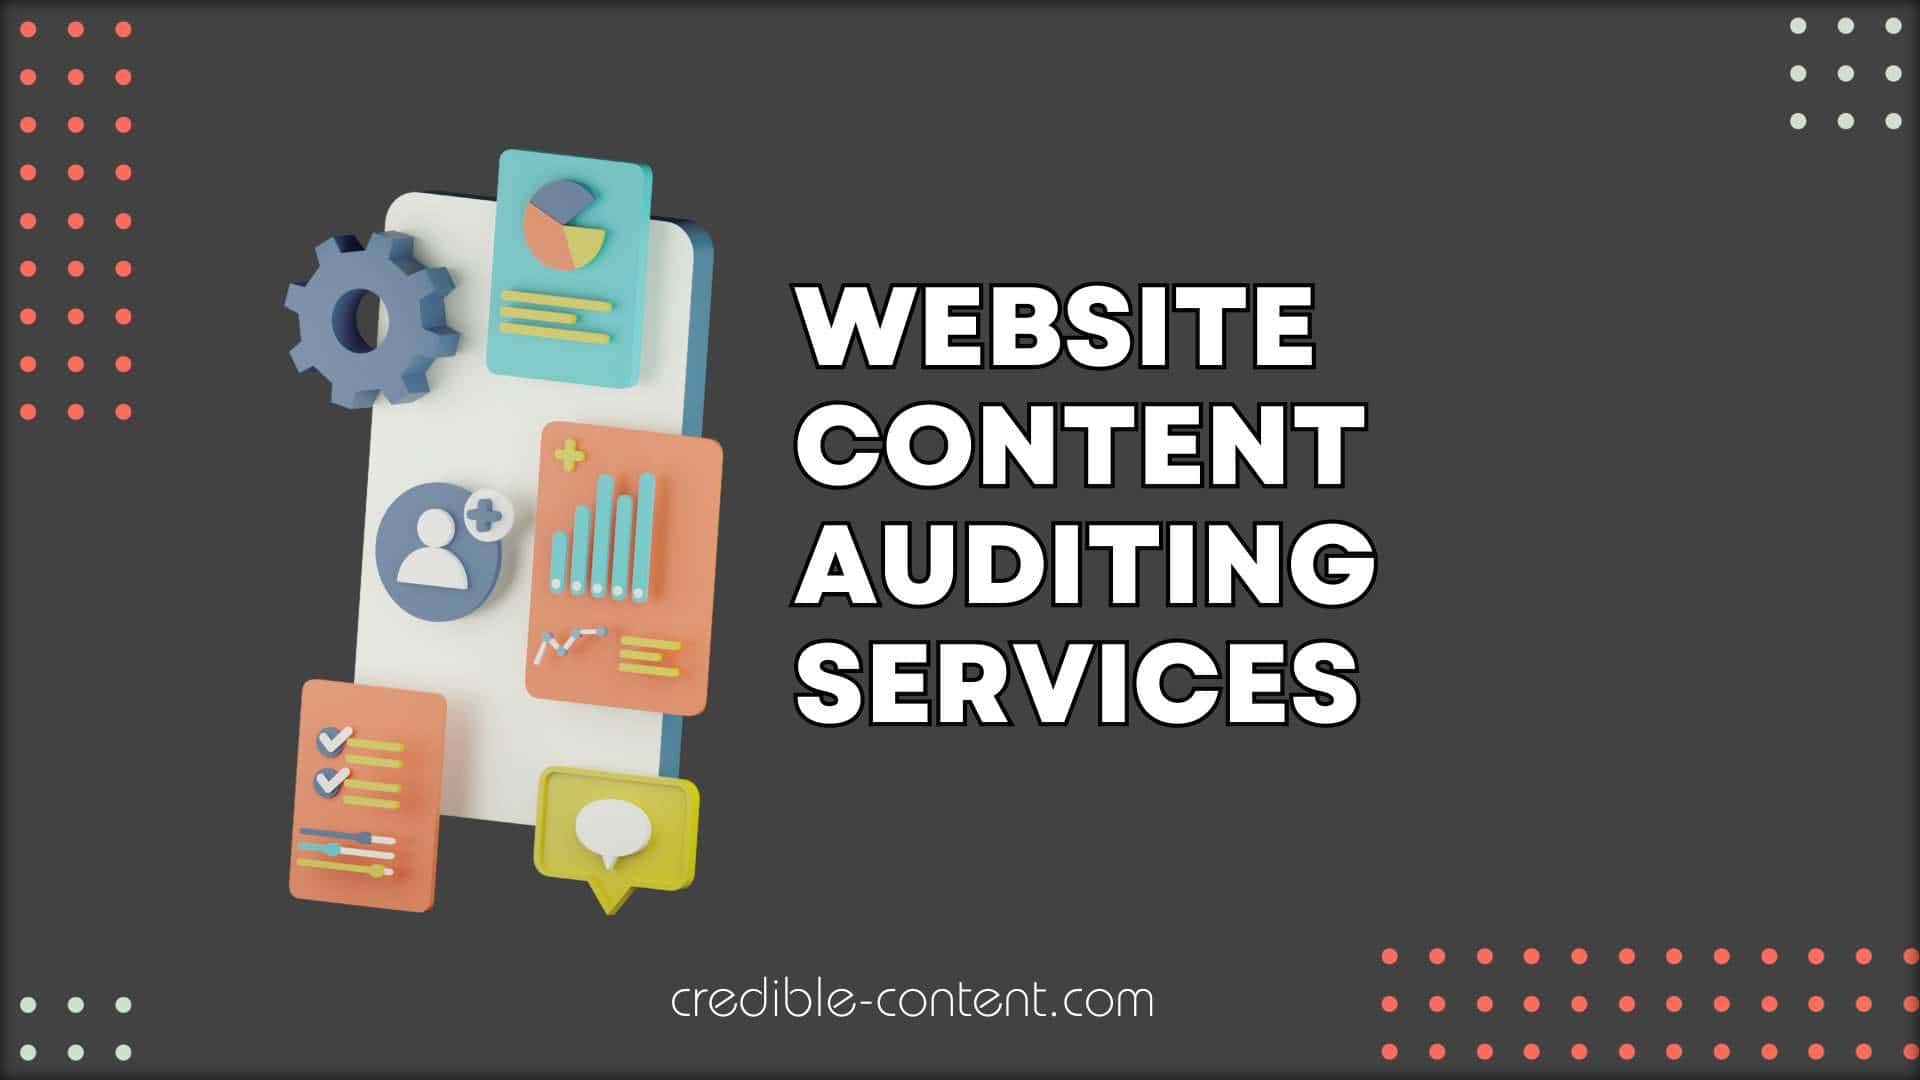 Website content auditing services